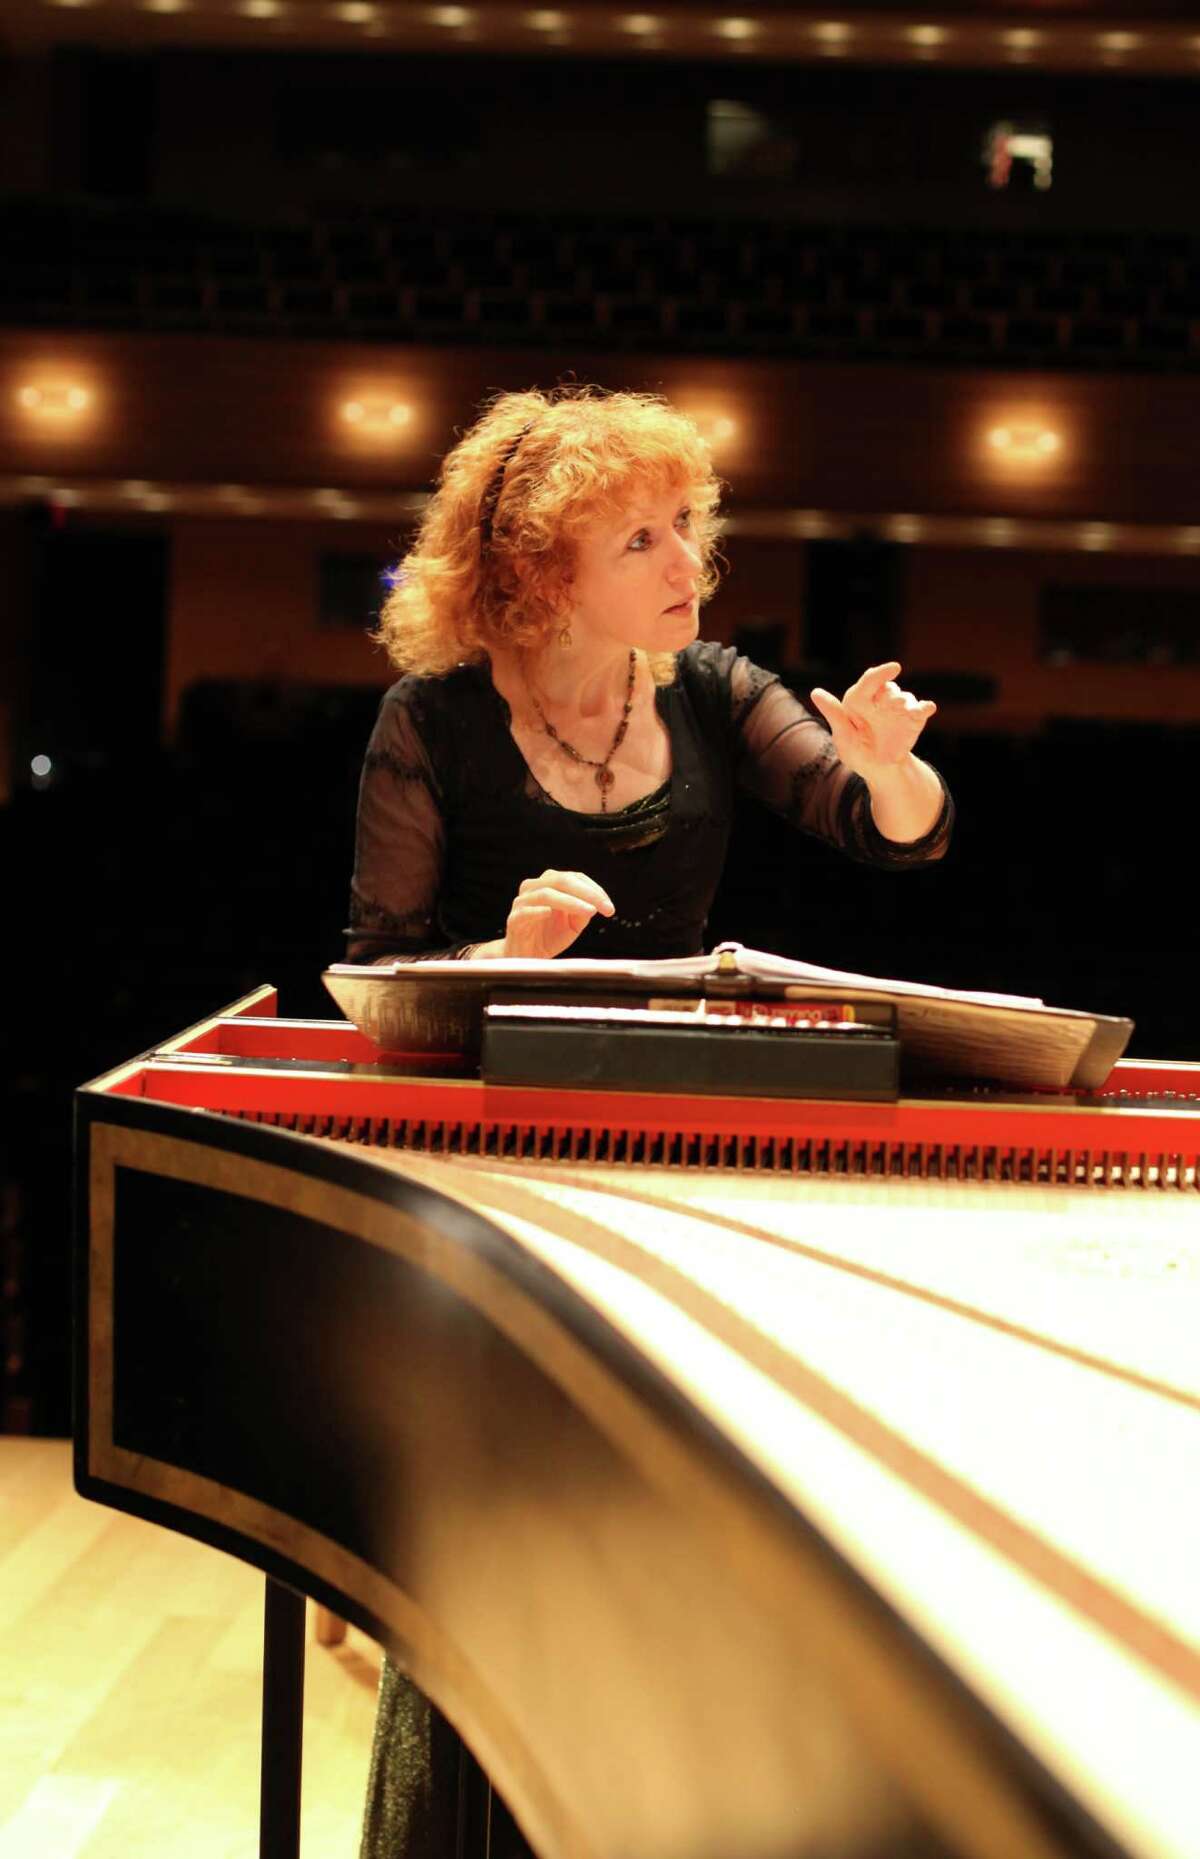 Harpsichordist and conductor Jeannette Sorrell will direct Mercury's performance of J.S. Bach's Brandenburg Concertos.